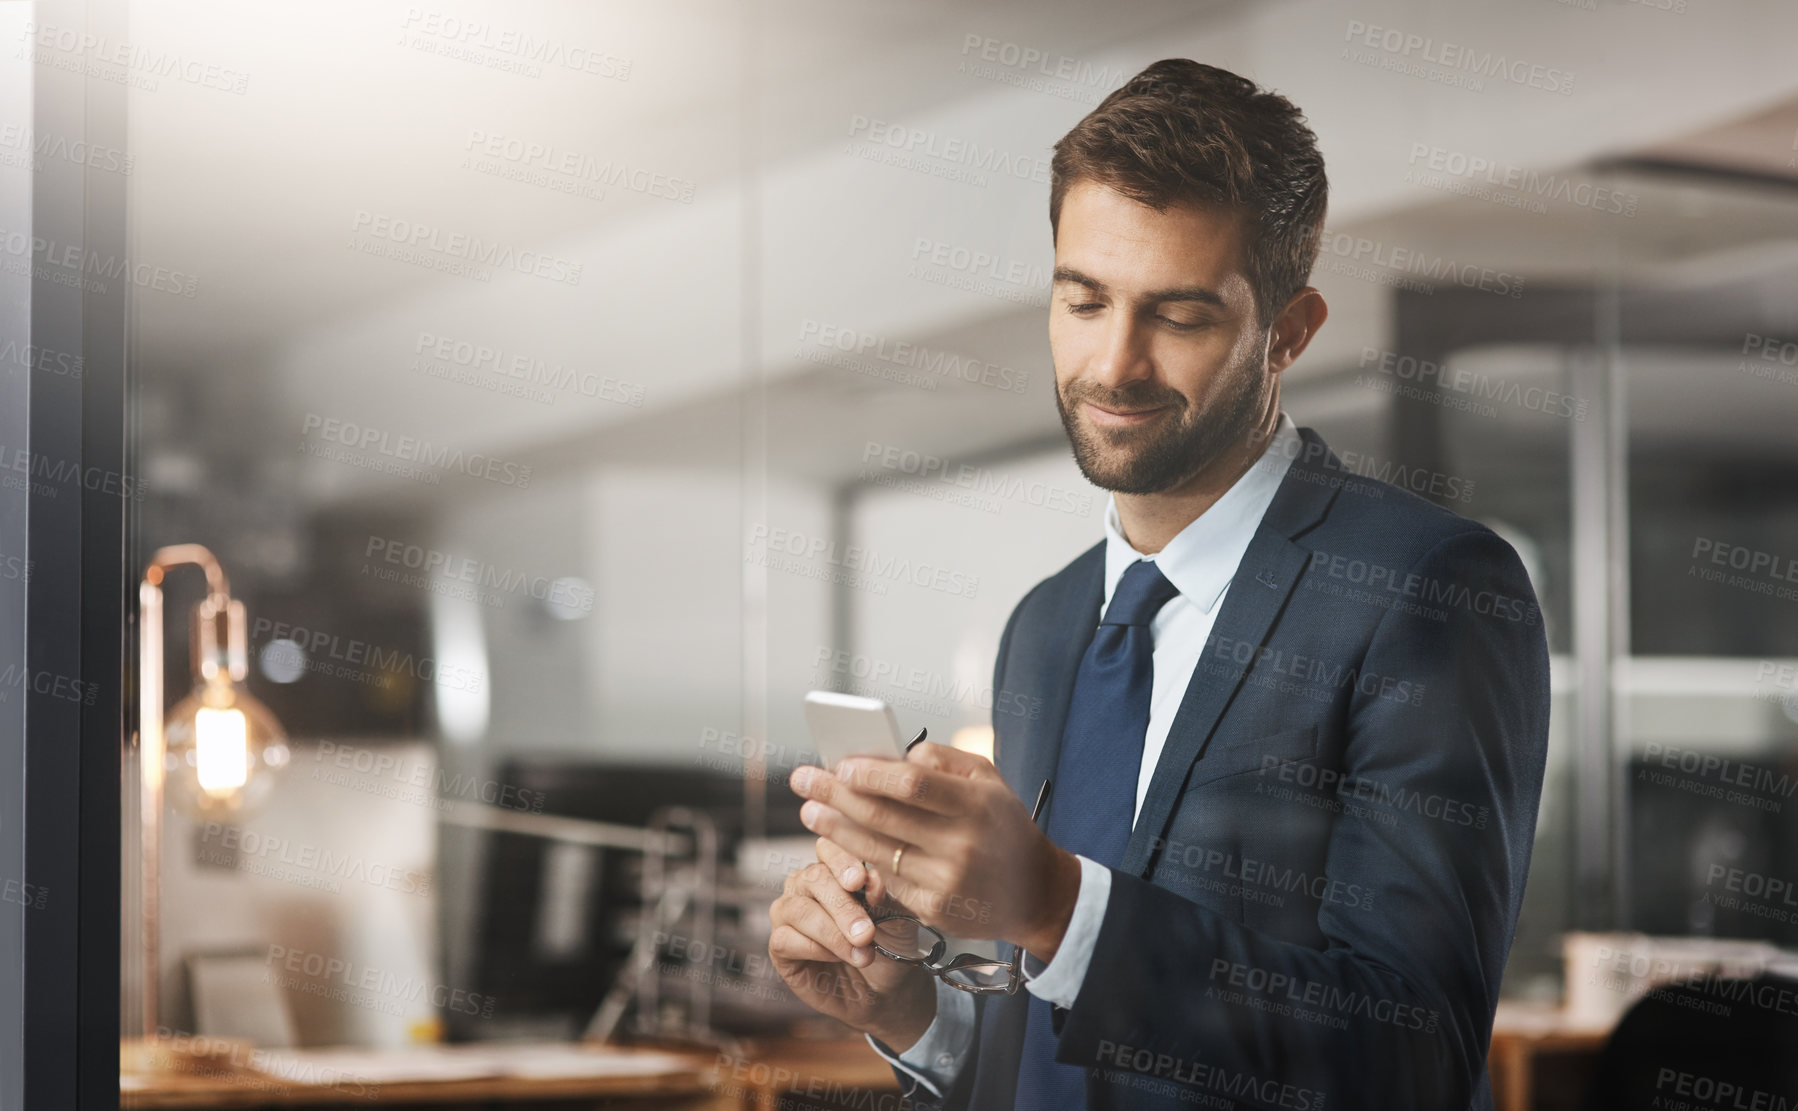 Buy stock photo Shot of a young businessman using a cellphone while working late in an office